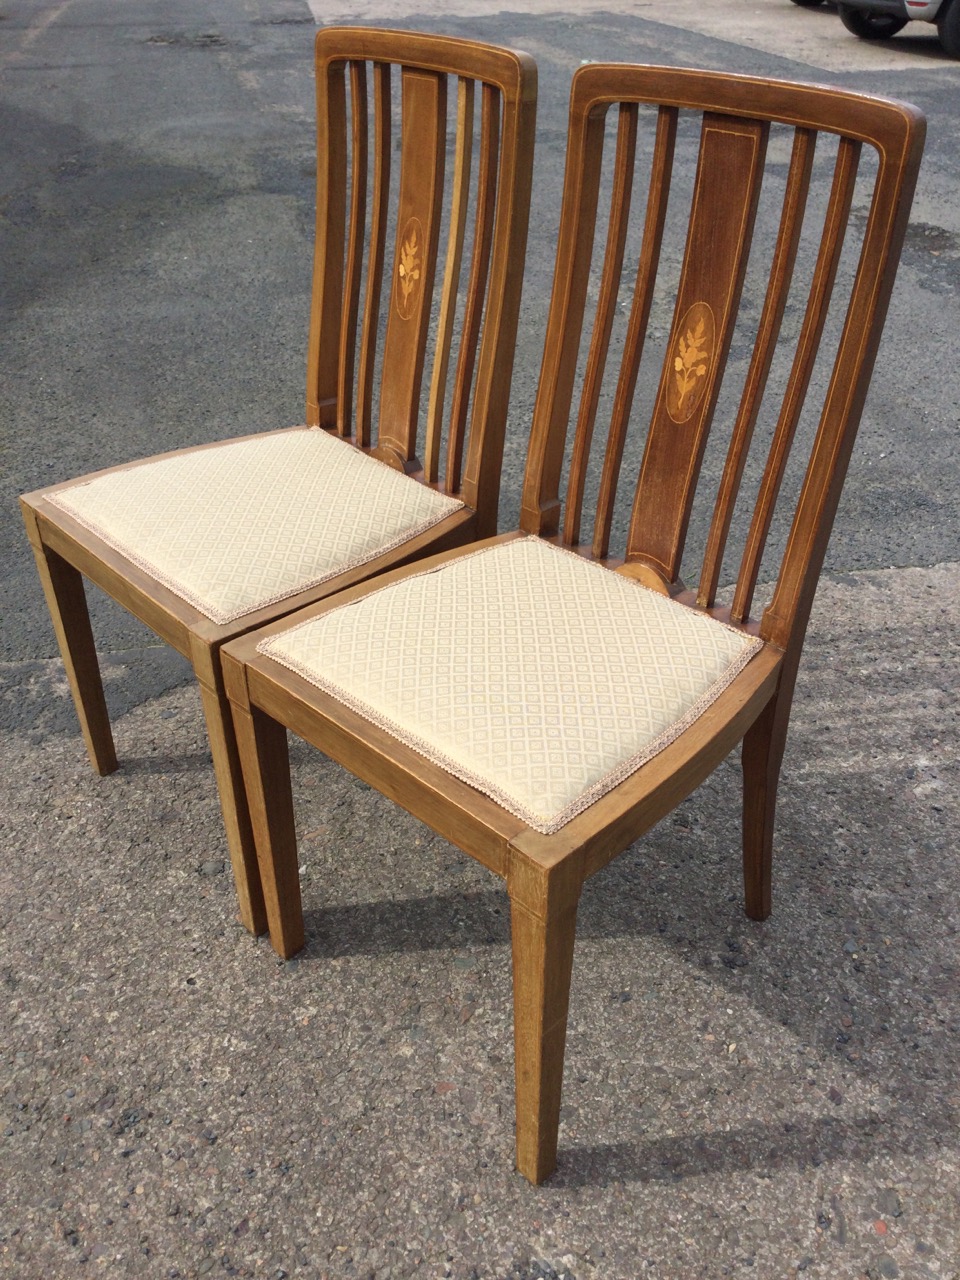 A pair of Edwardian mahogany chairs with rectangular boxwood strung slatted backs and floral - Image 3 of 3